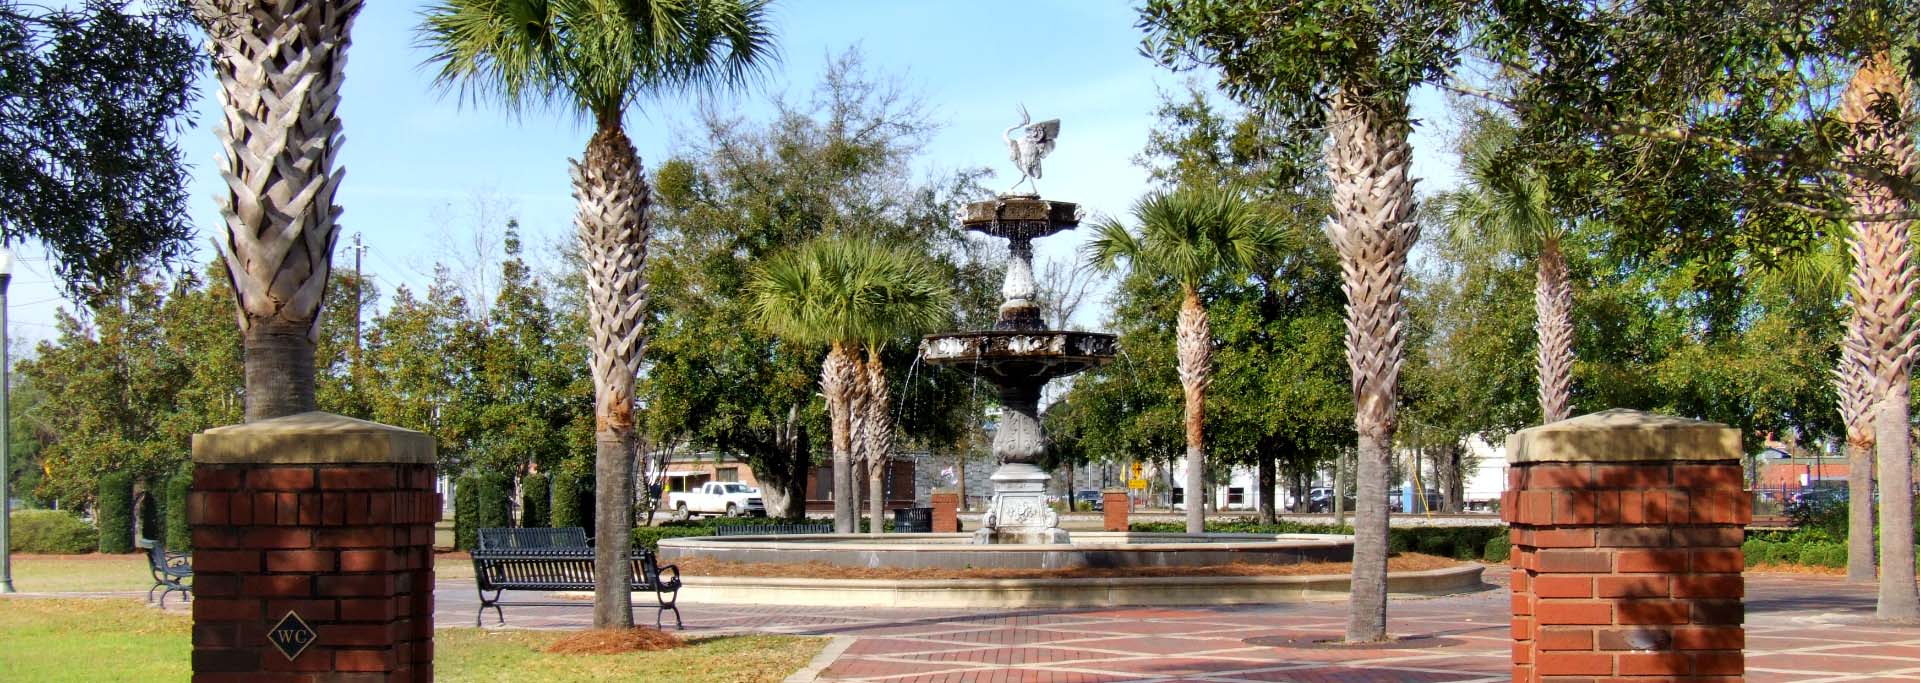 downtown area with fountain